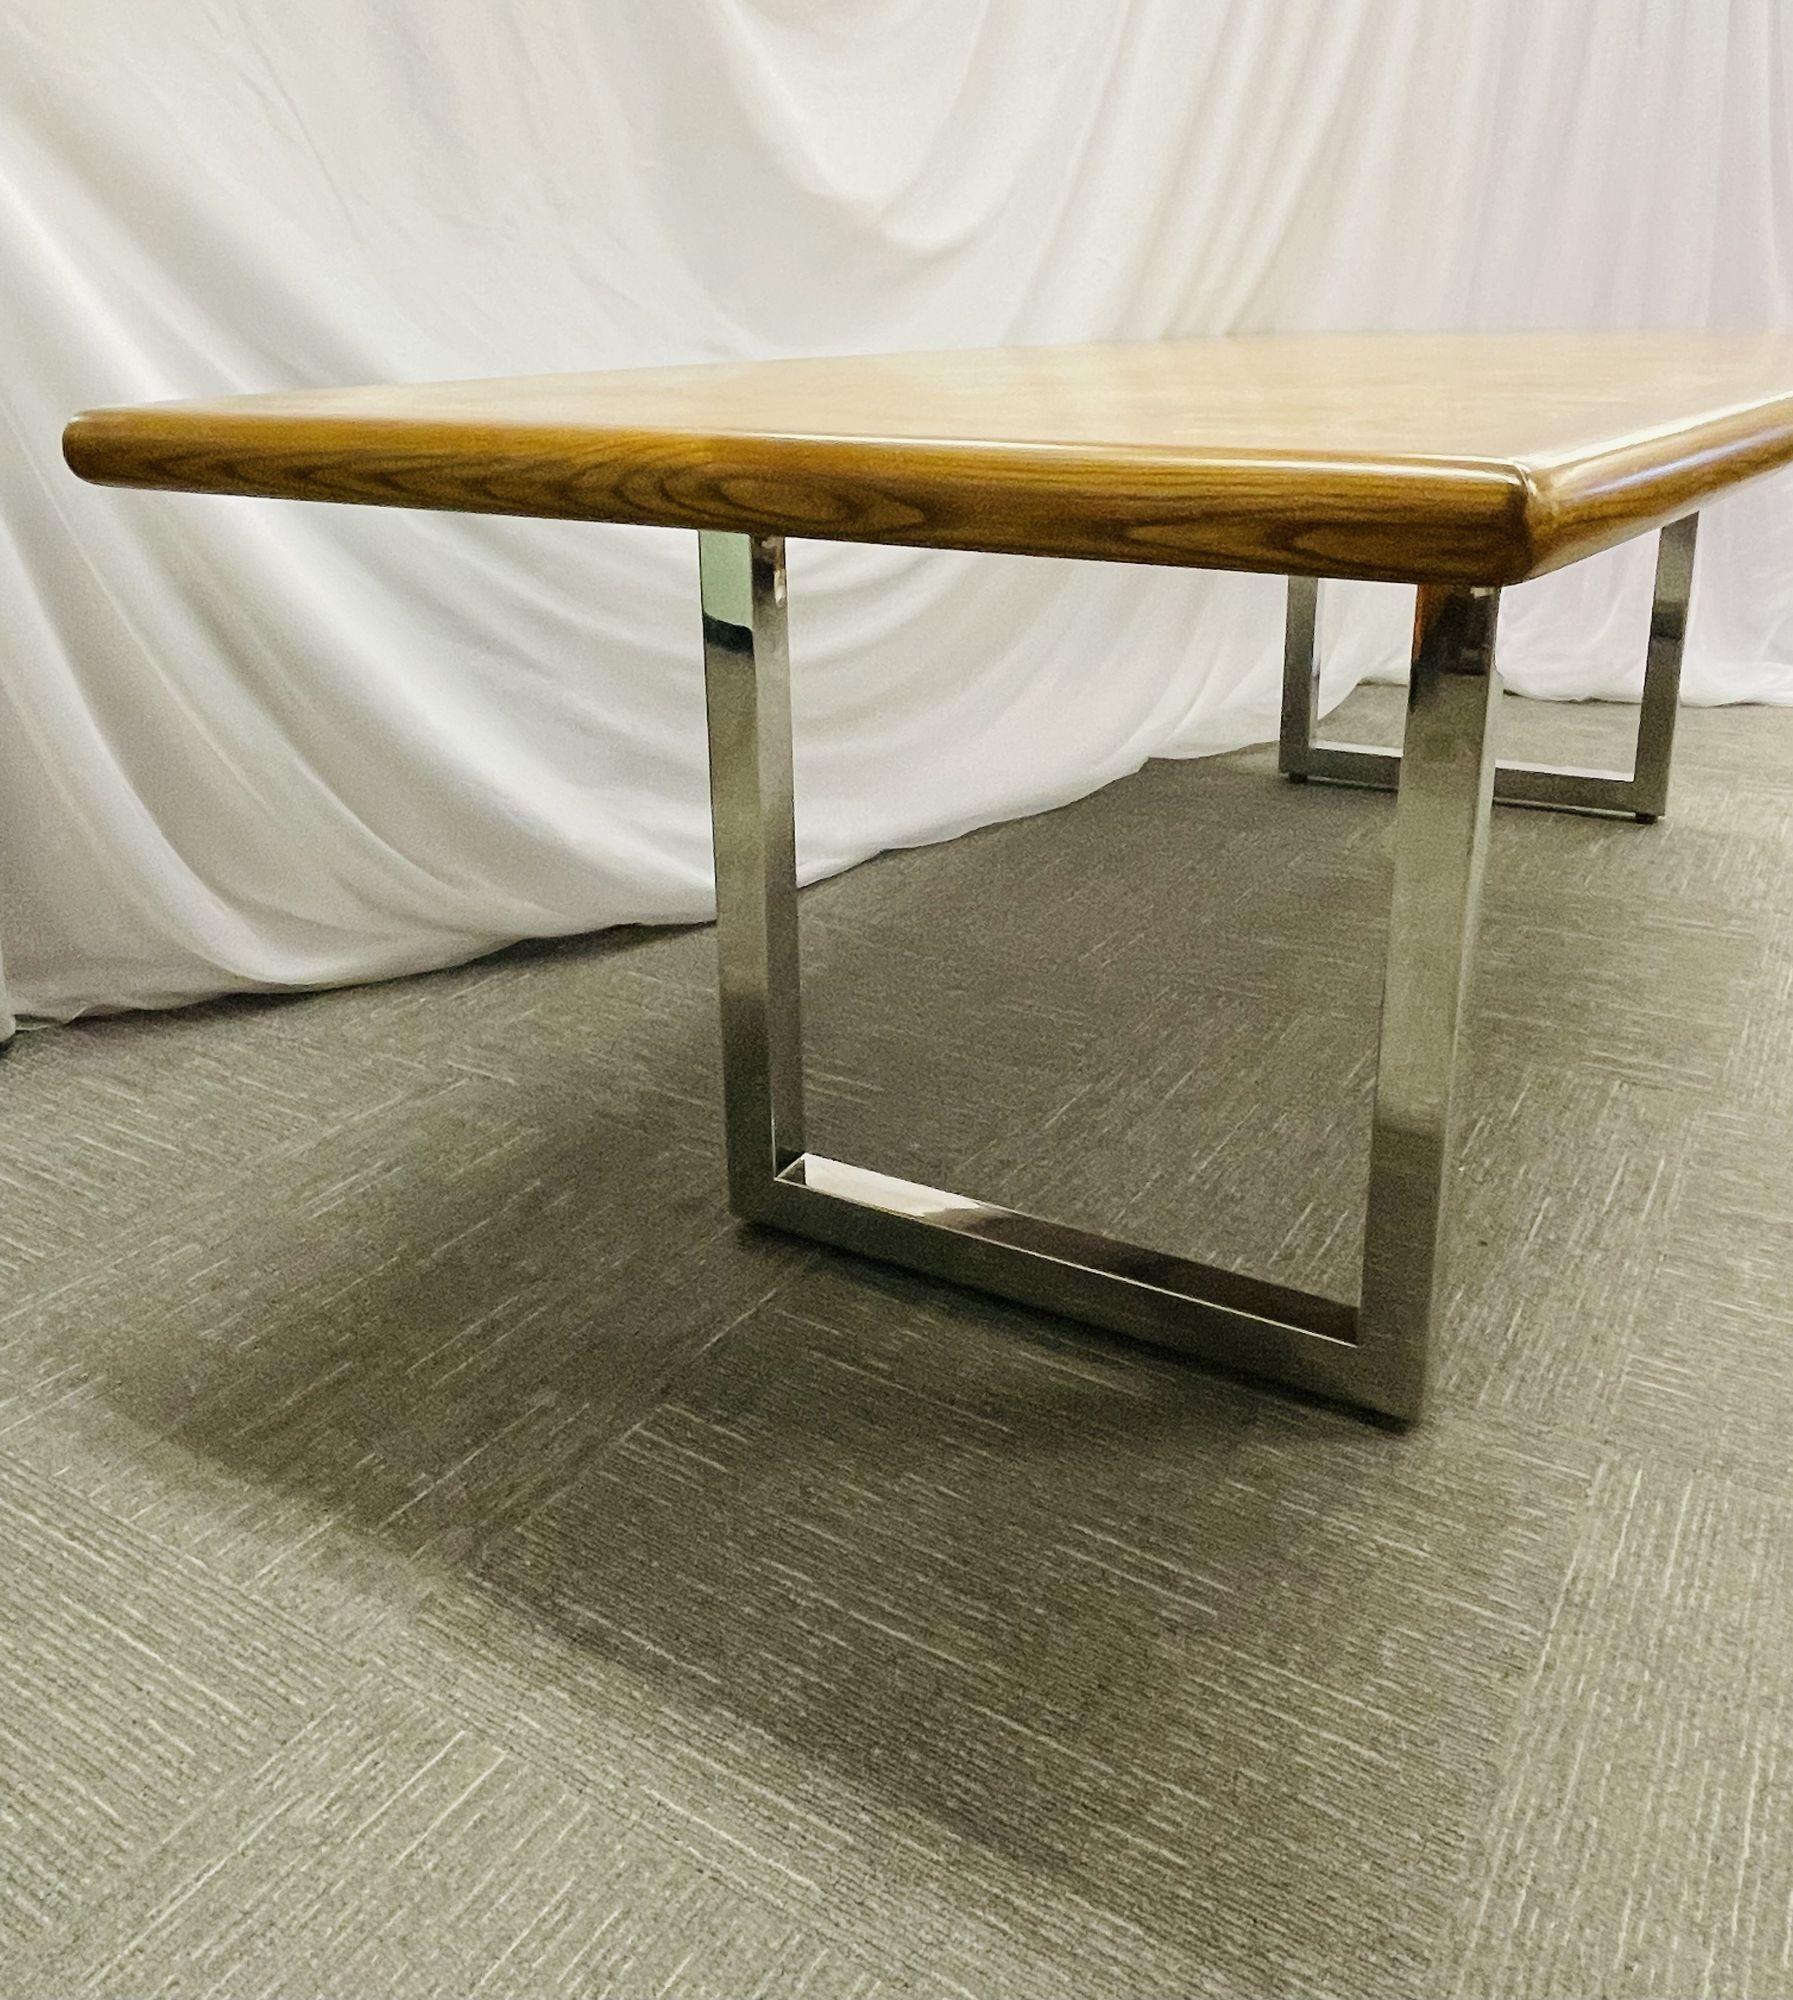 Mid-Century Modern Dining / Conference Table, Burl Wood, Chrome, American, 1960s For Sale 5